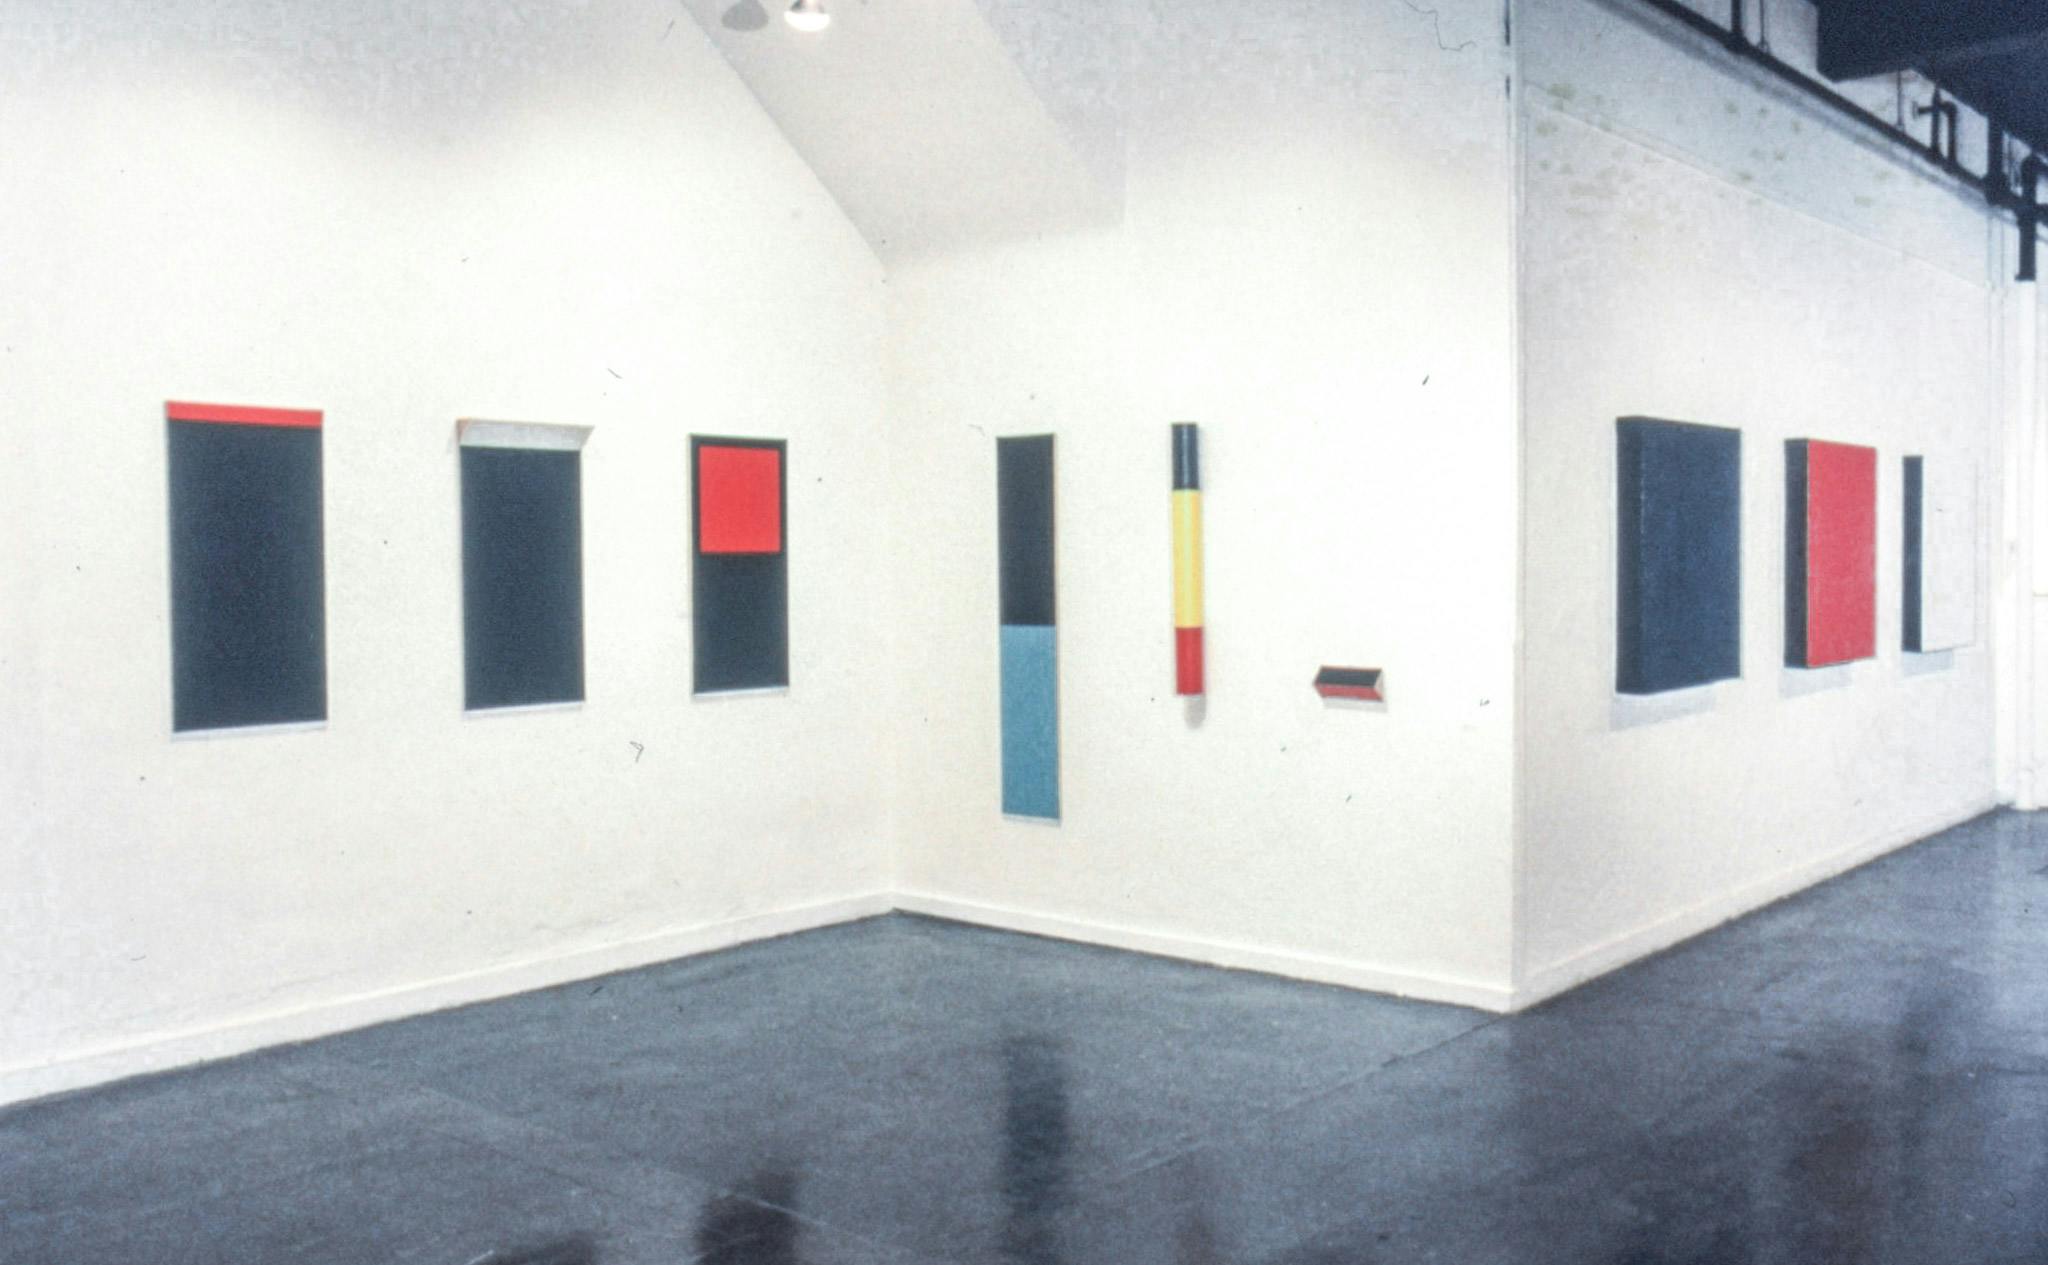 Paintings mounted on three different walls of a gallery. Most are on rectangular canvases, but one painting is a vertical cylinder shape. The paintings are white, blue, red, yellow, and black. 